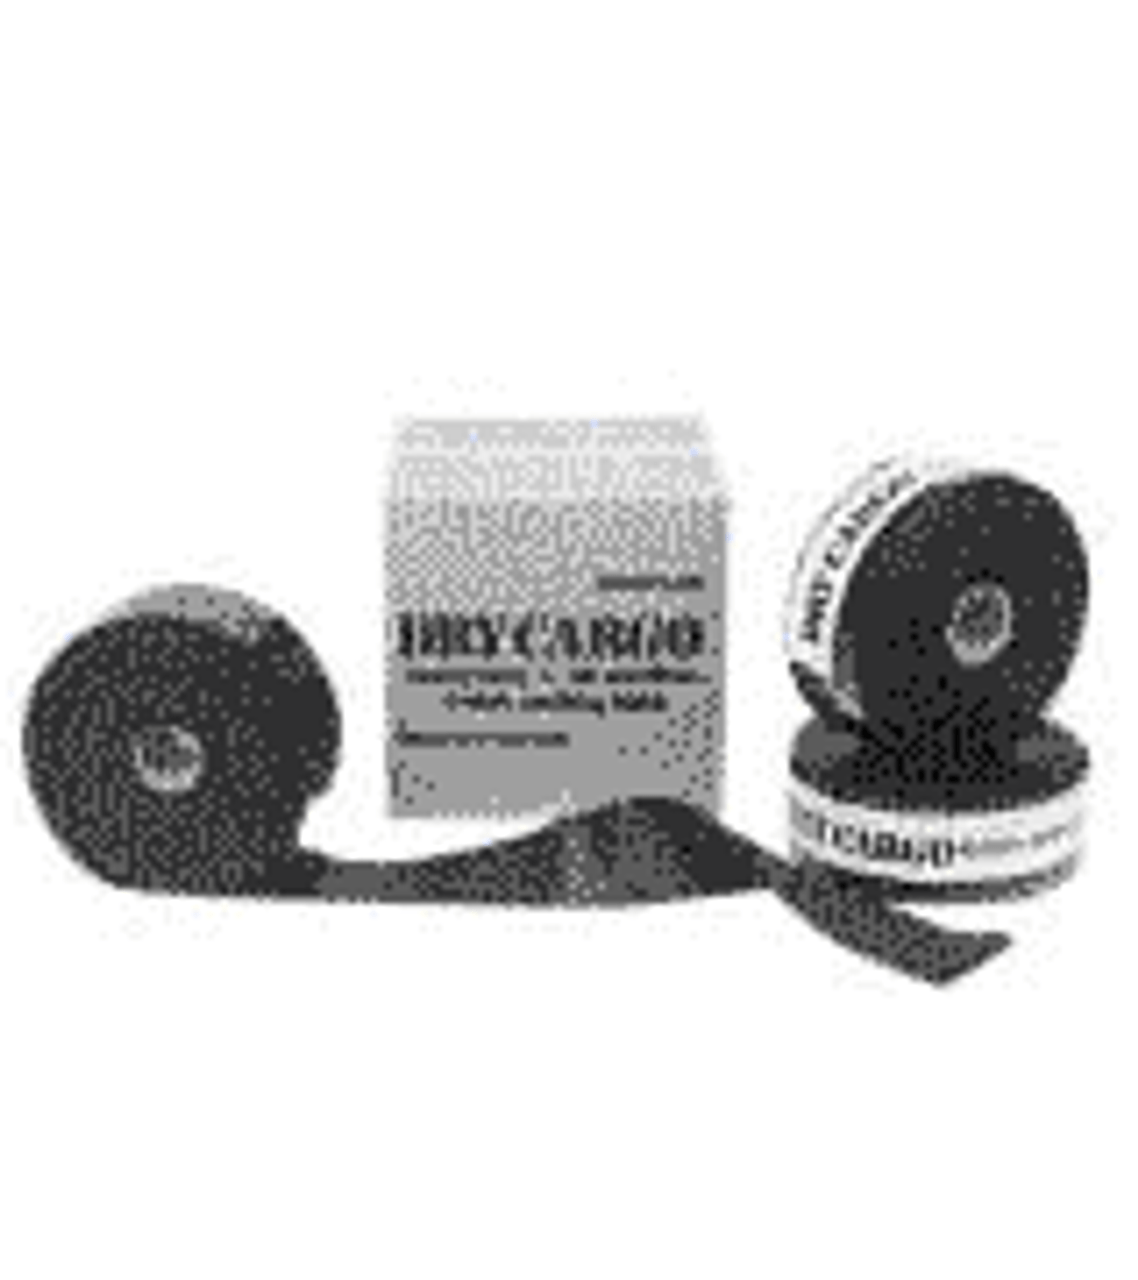 IMPA 232448 HATCH COVER TAPE 100mm roll of 10 mtr.